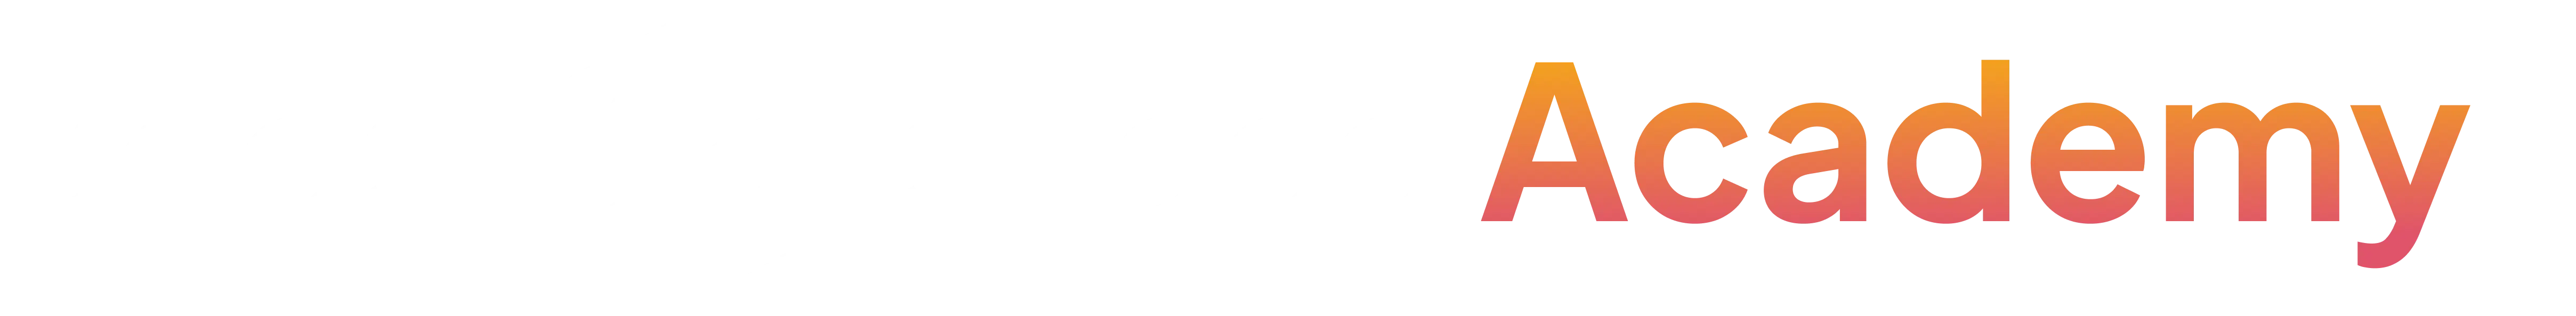 Boost.space Academy Logo